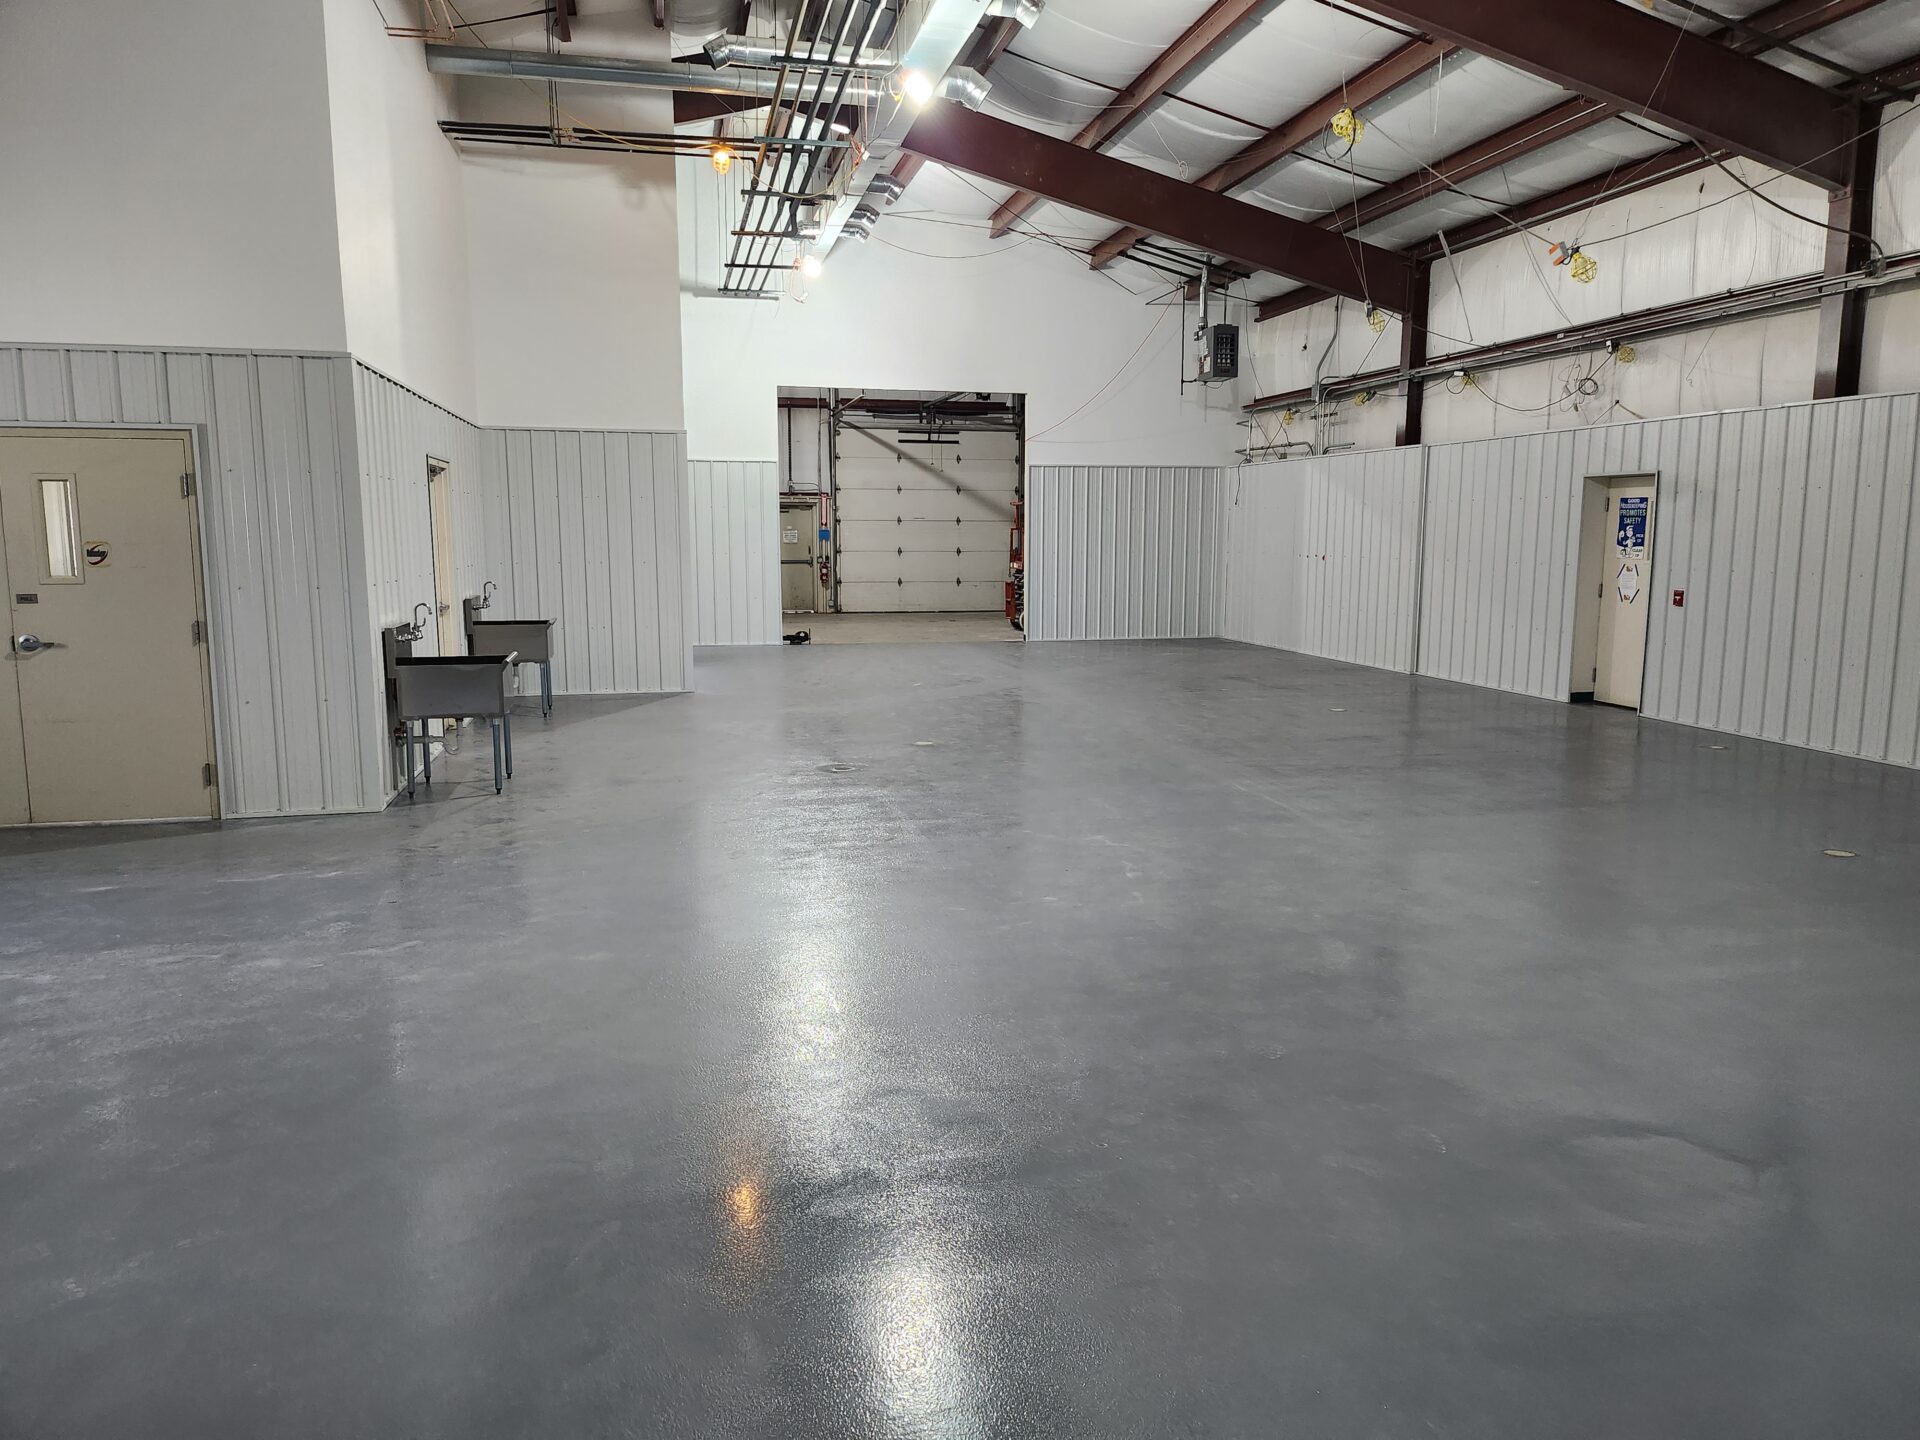 Spacious industrial garage with shiny concrete floor.